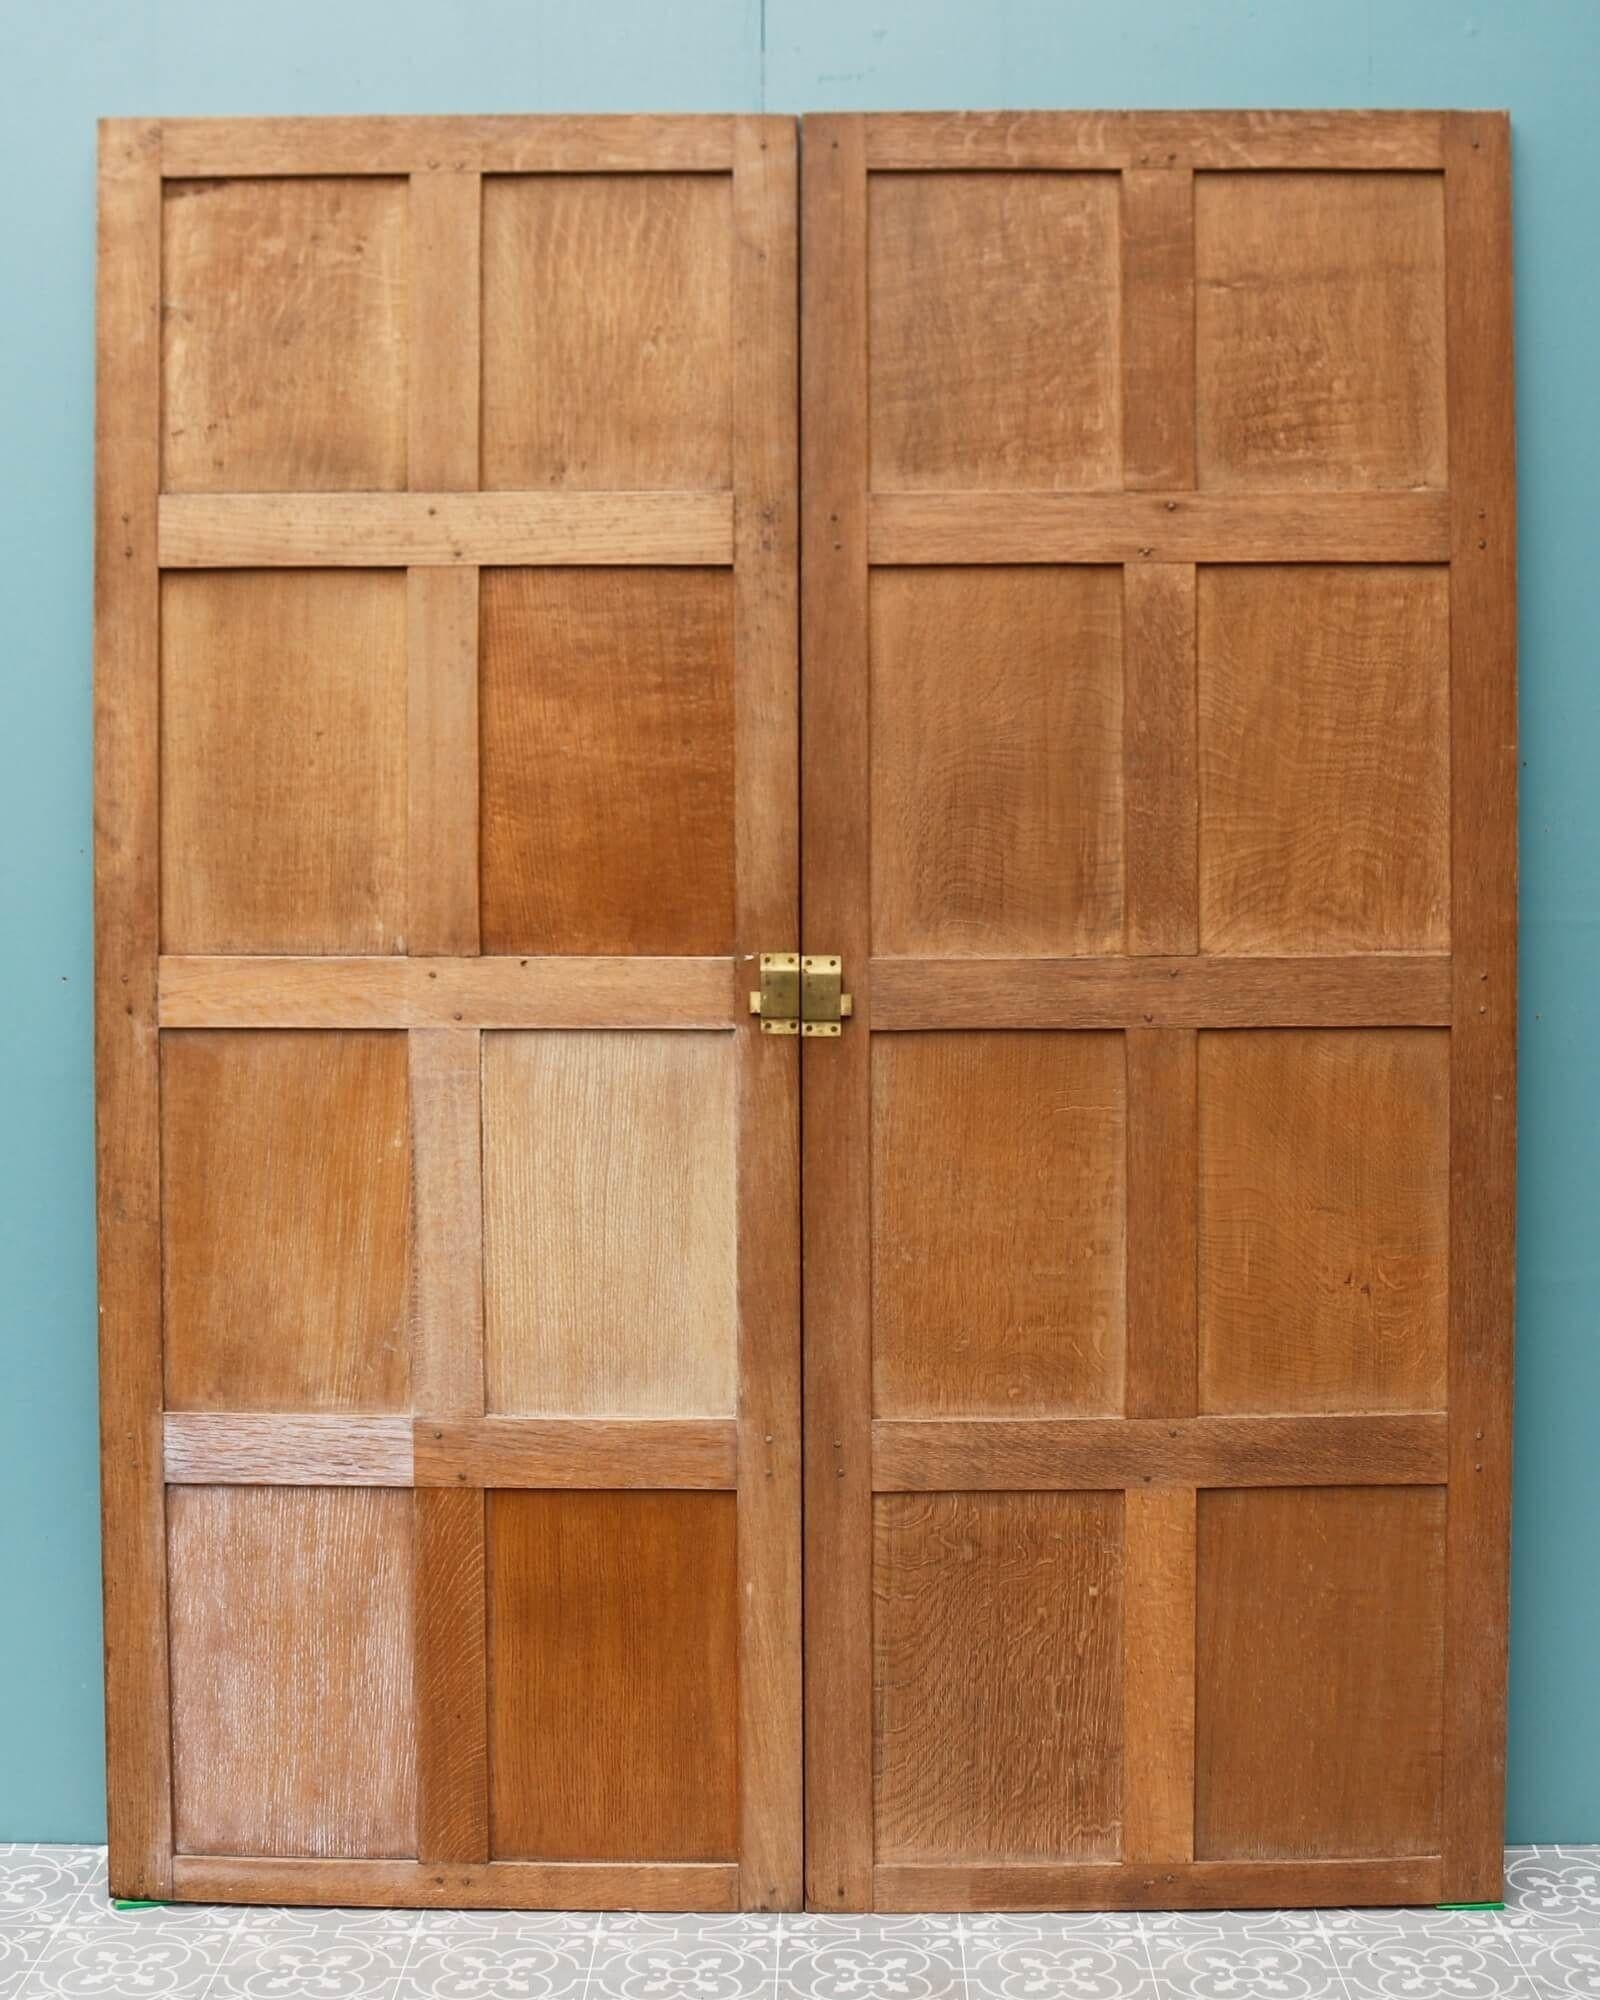 A set of Tudor style Victorian oak double doors sourced from a master bedroom in a large house in Windsor Park. These antique oak cupboard doors encompass a range of styles including Tudor, Jacobean, and Georgian. At over 130 years old, these doors